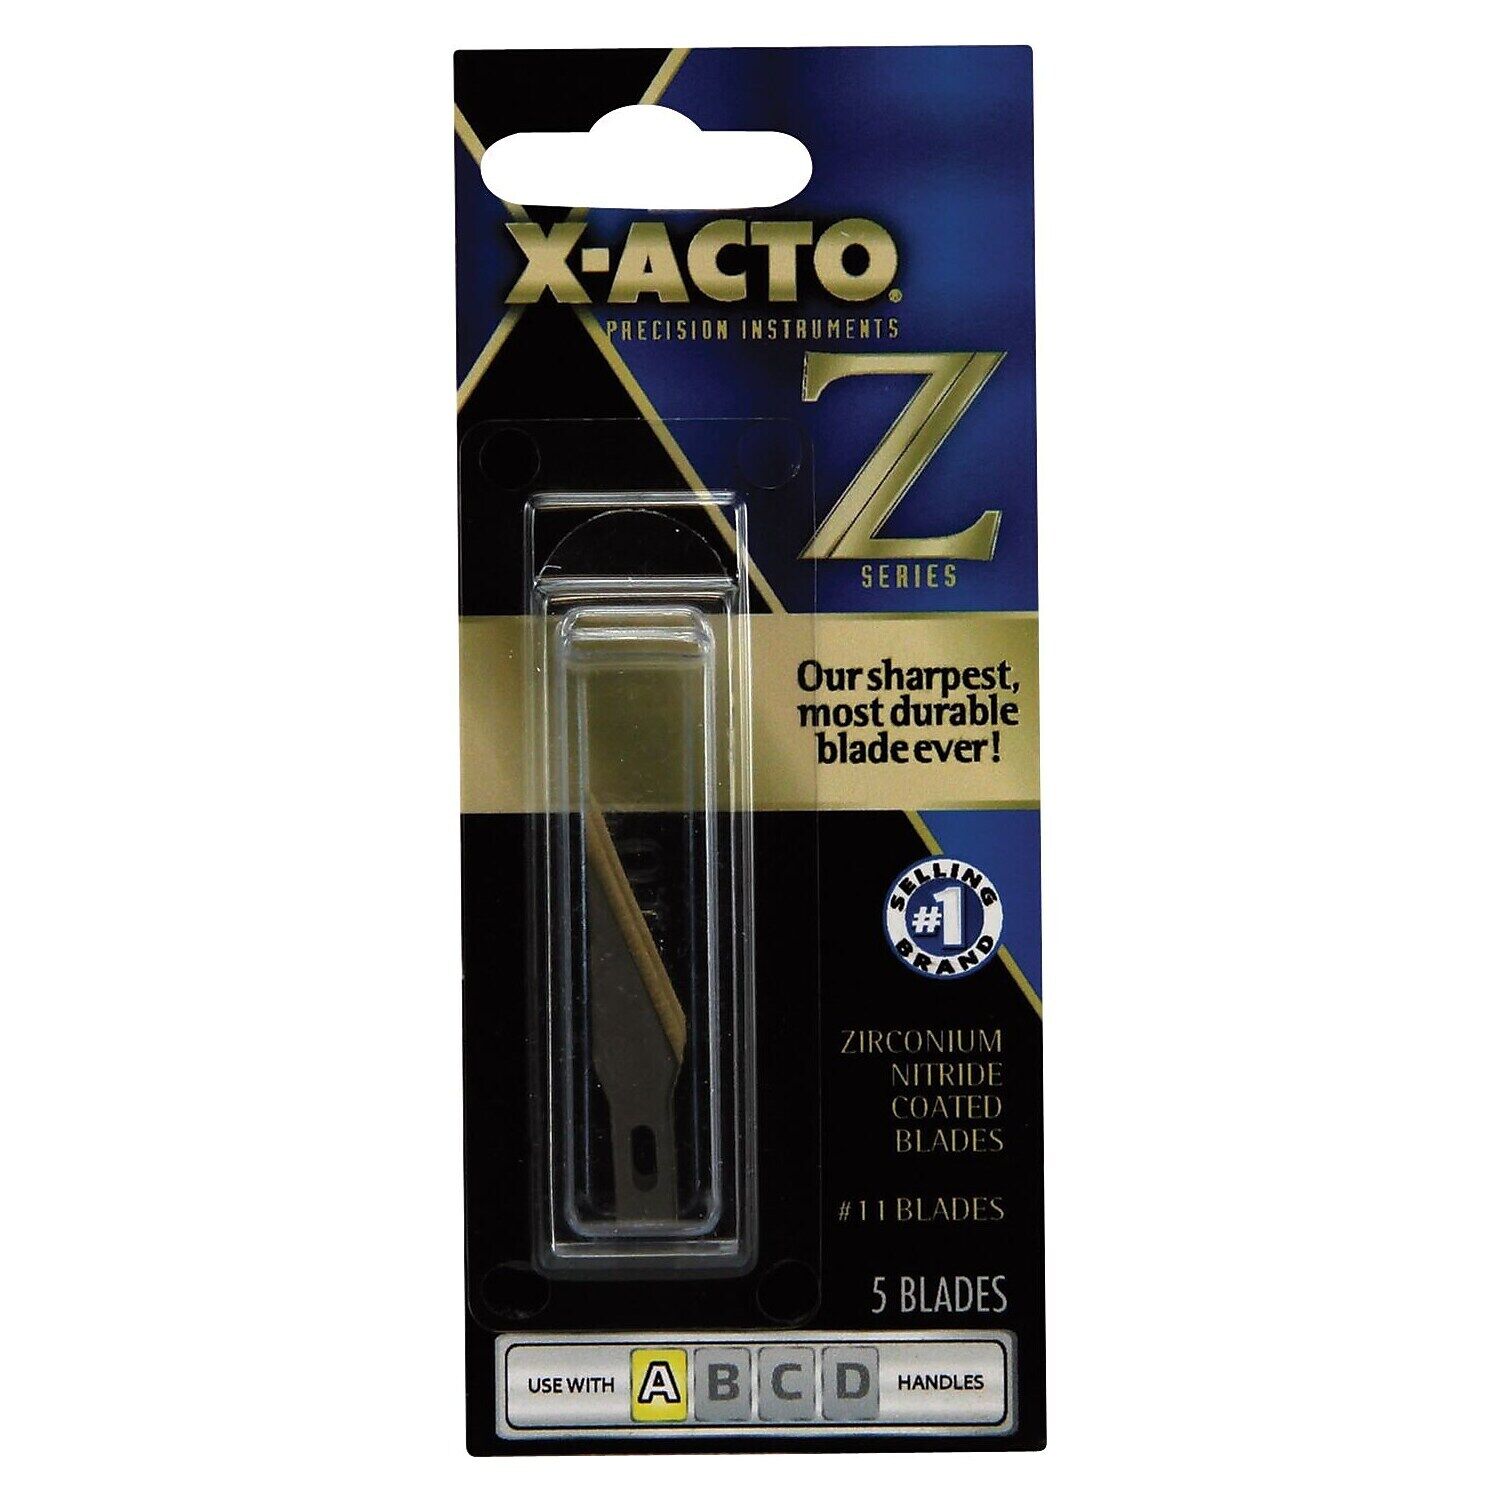 X-ACTO Z Series #11 Replacement Blades 5/Pack XZ211W | eBay